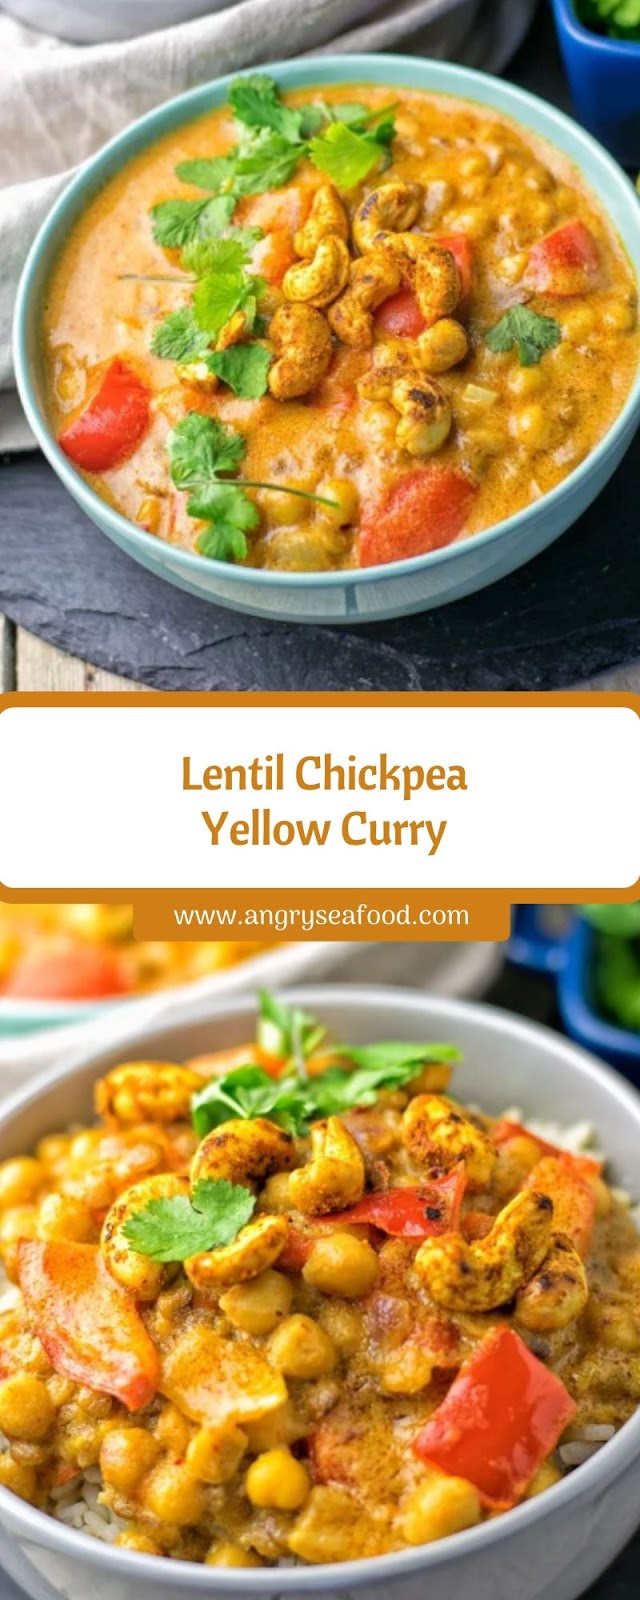 Lentil Chickpea Yellow Curry